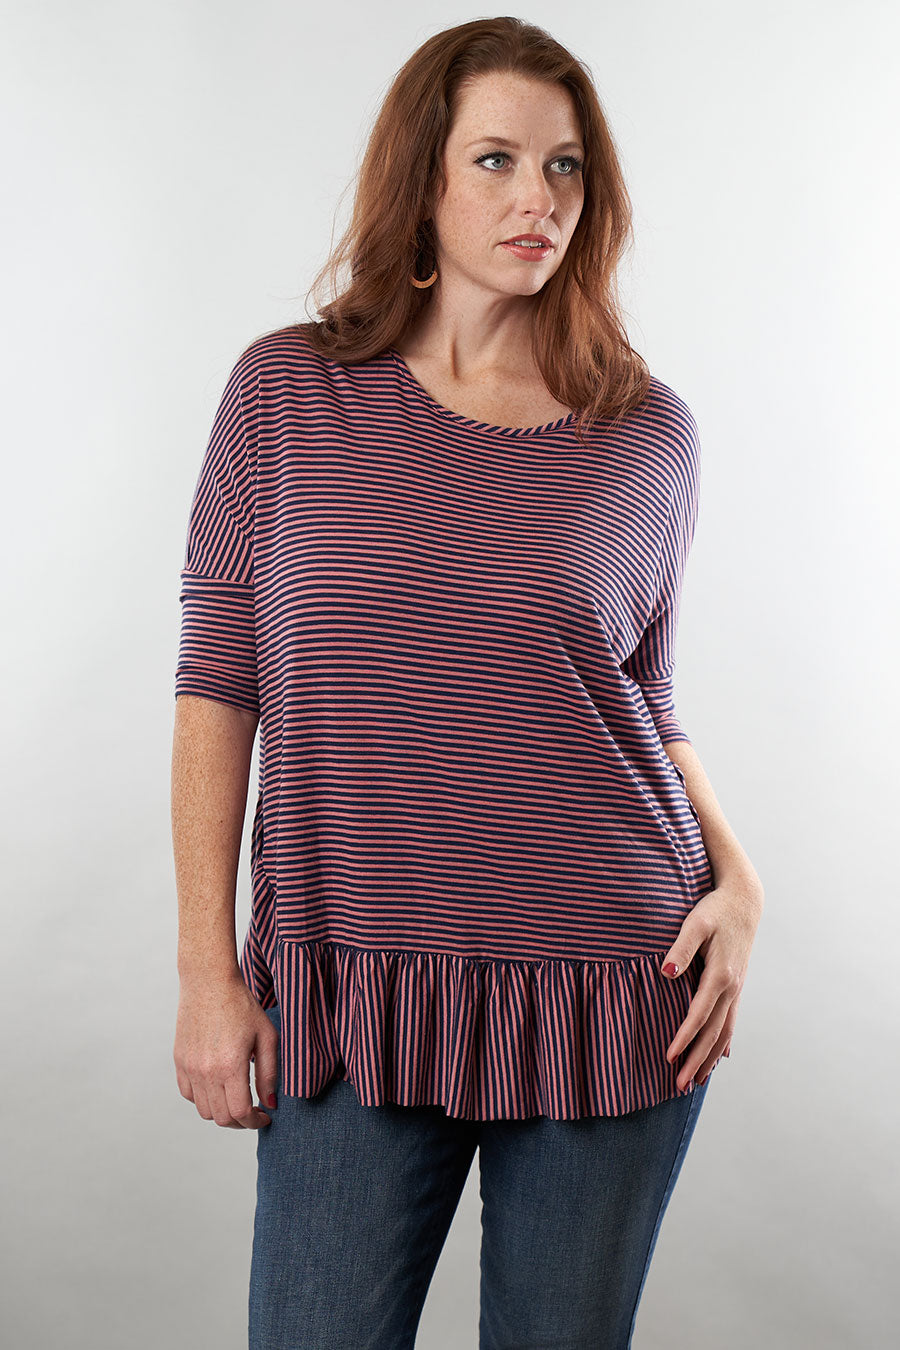 Straight & Narrow Striped Top Front